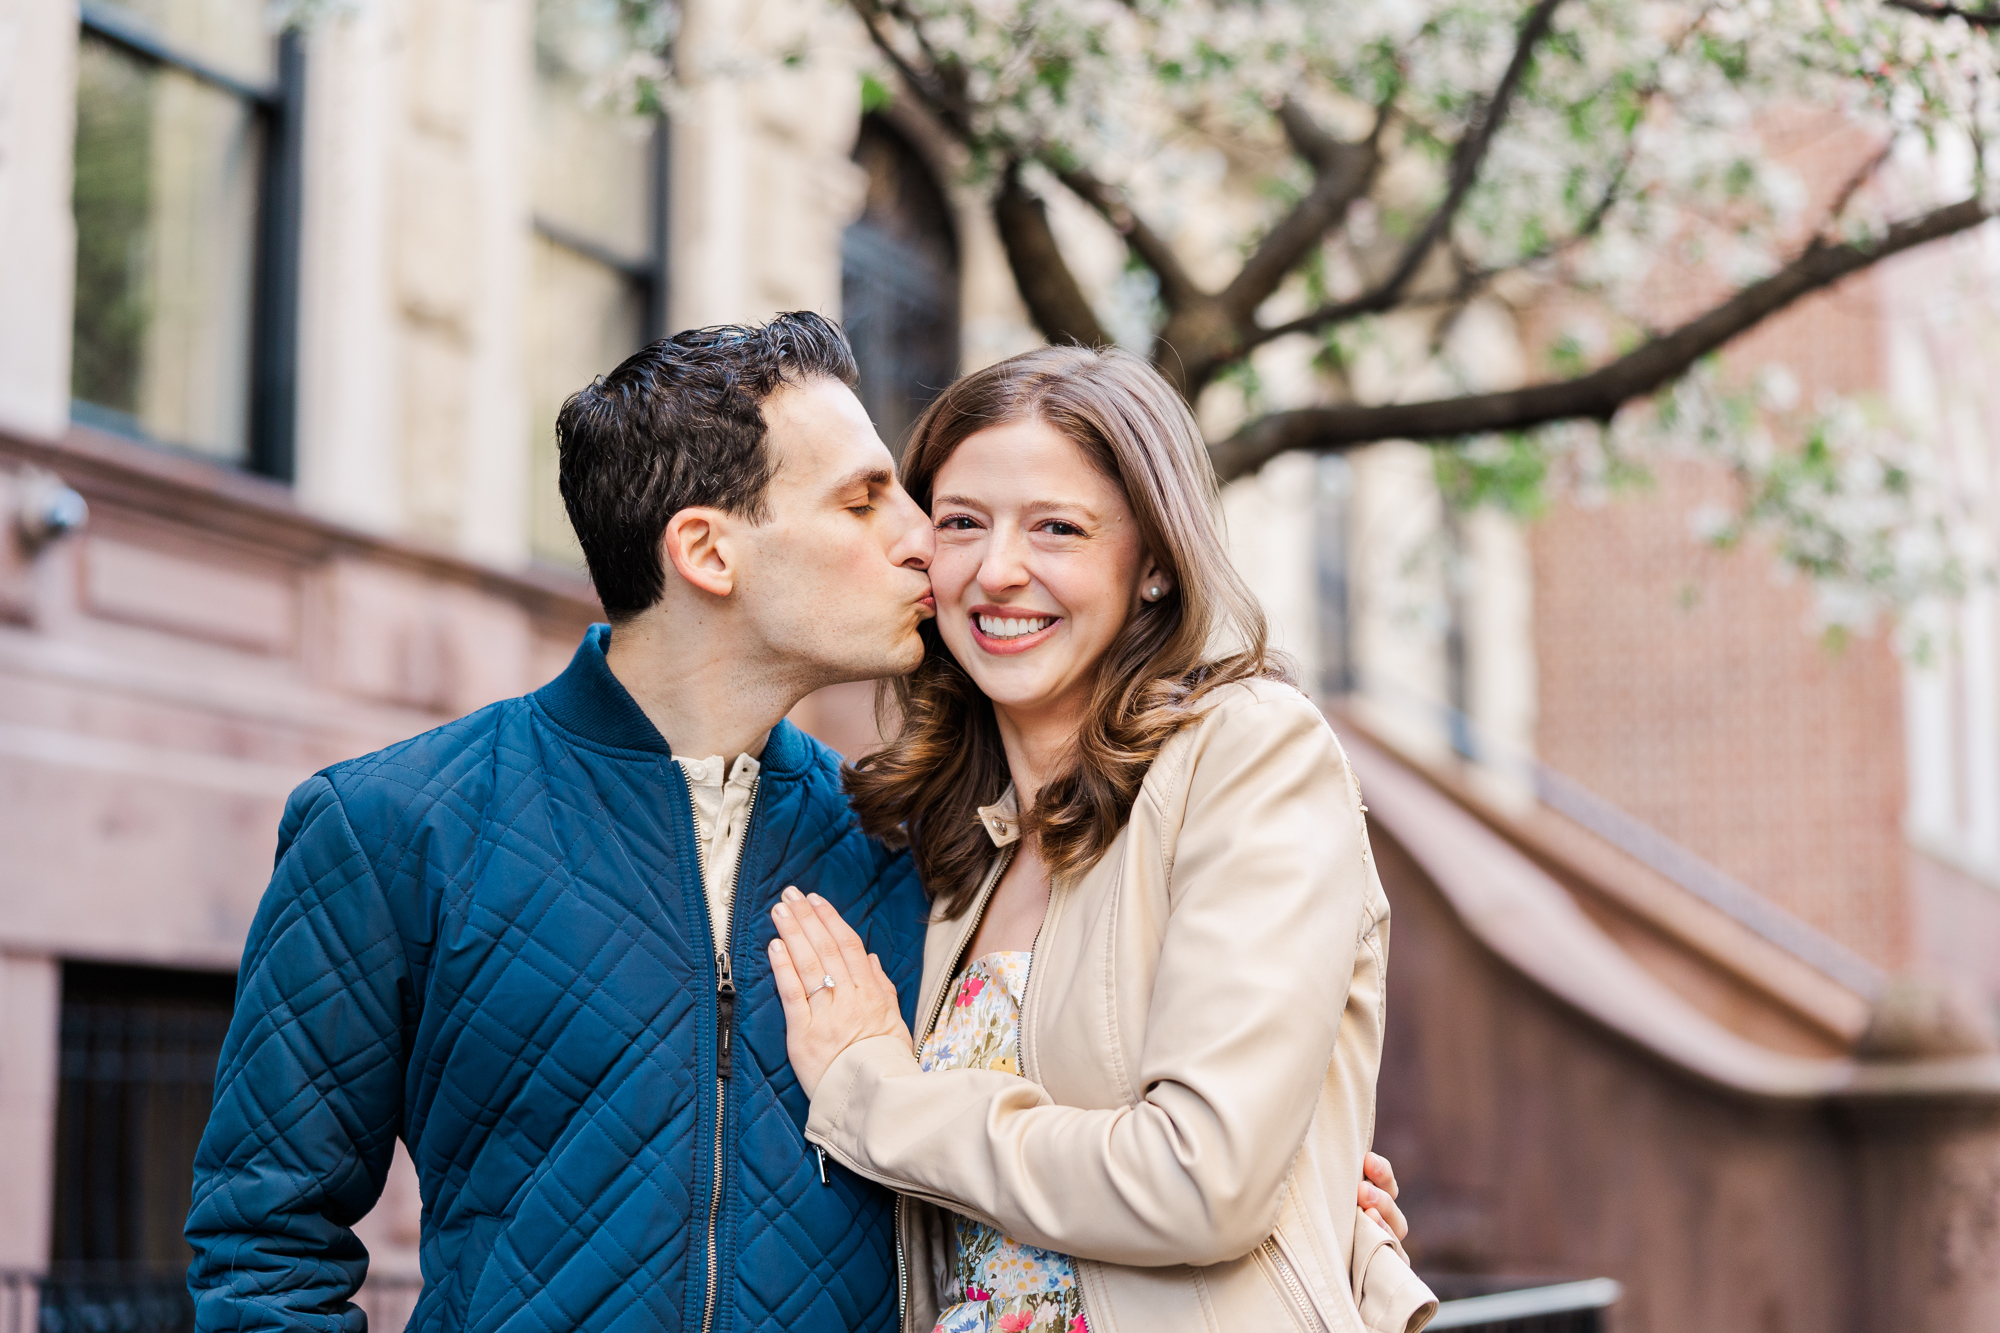 Romantic Upper East Side Engagement Photo Shoot in Spring